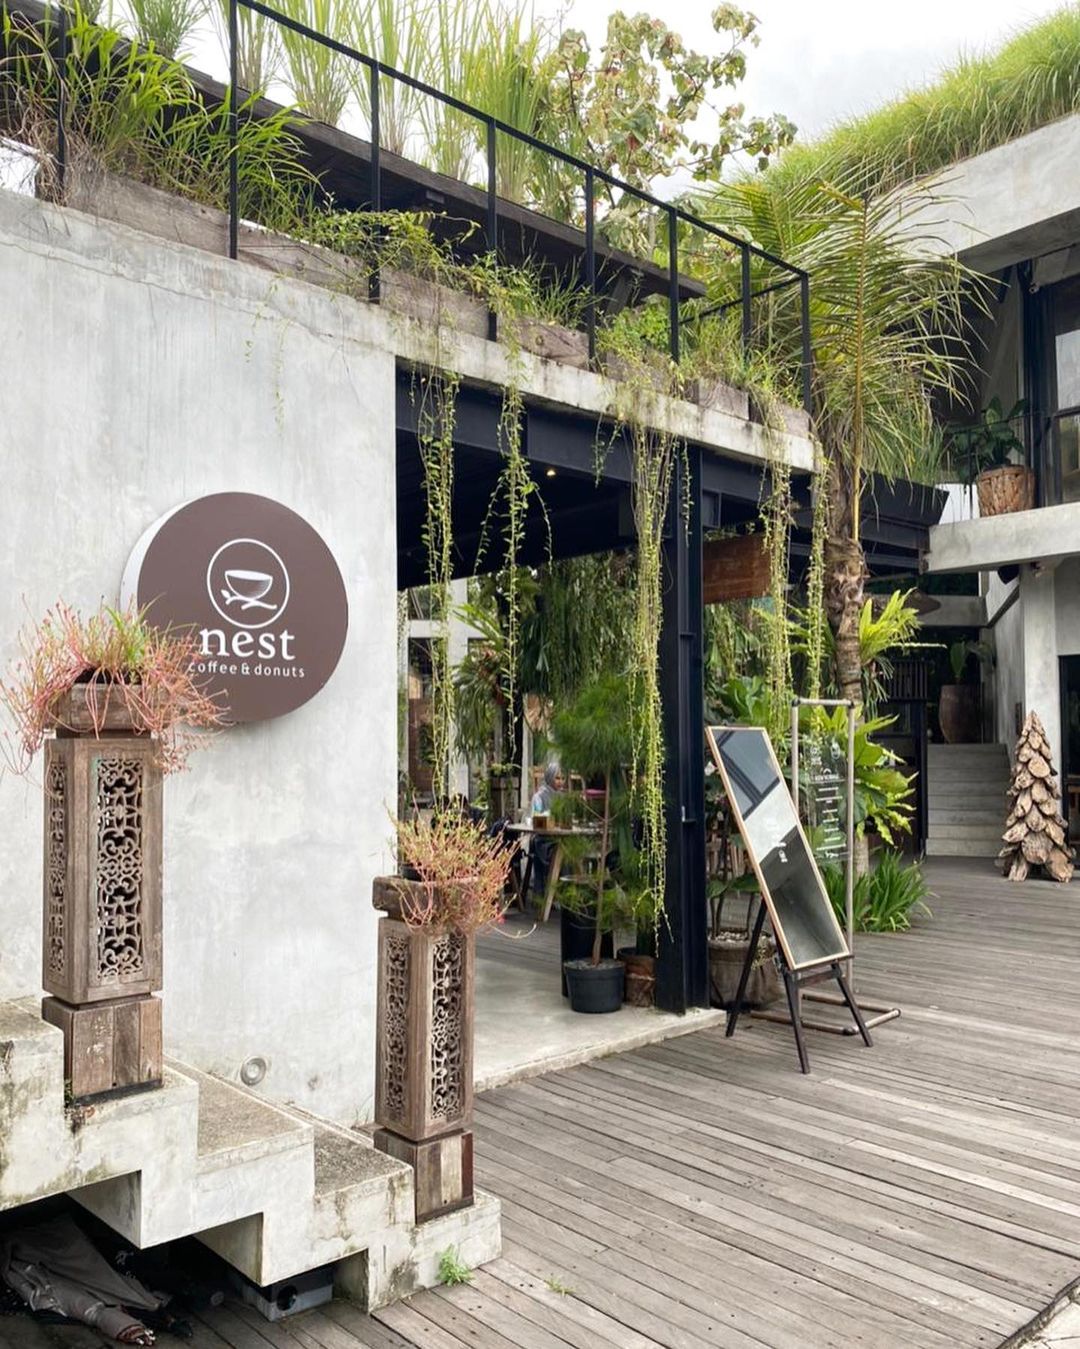 Cafe Nest Coffee & Donuts